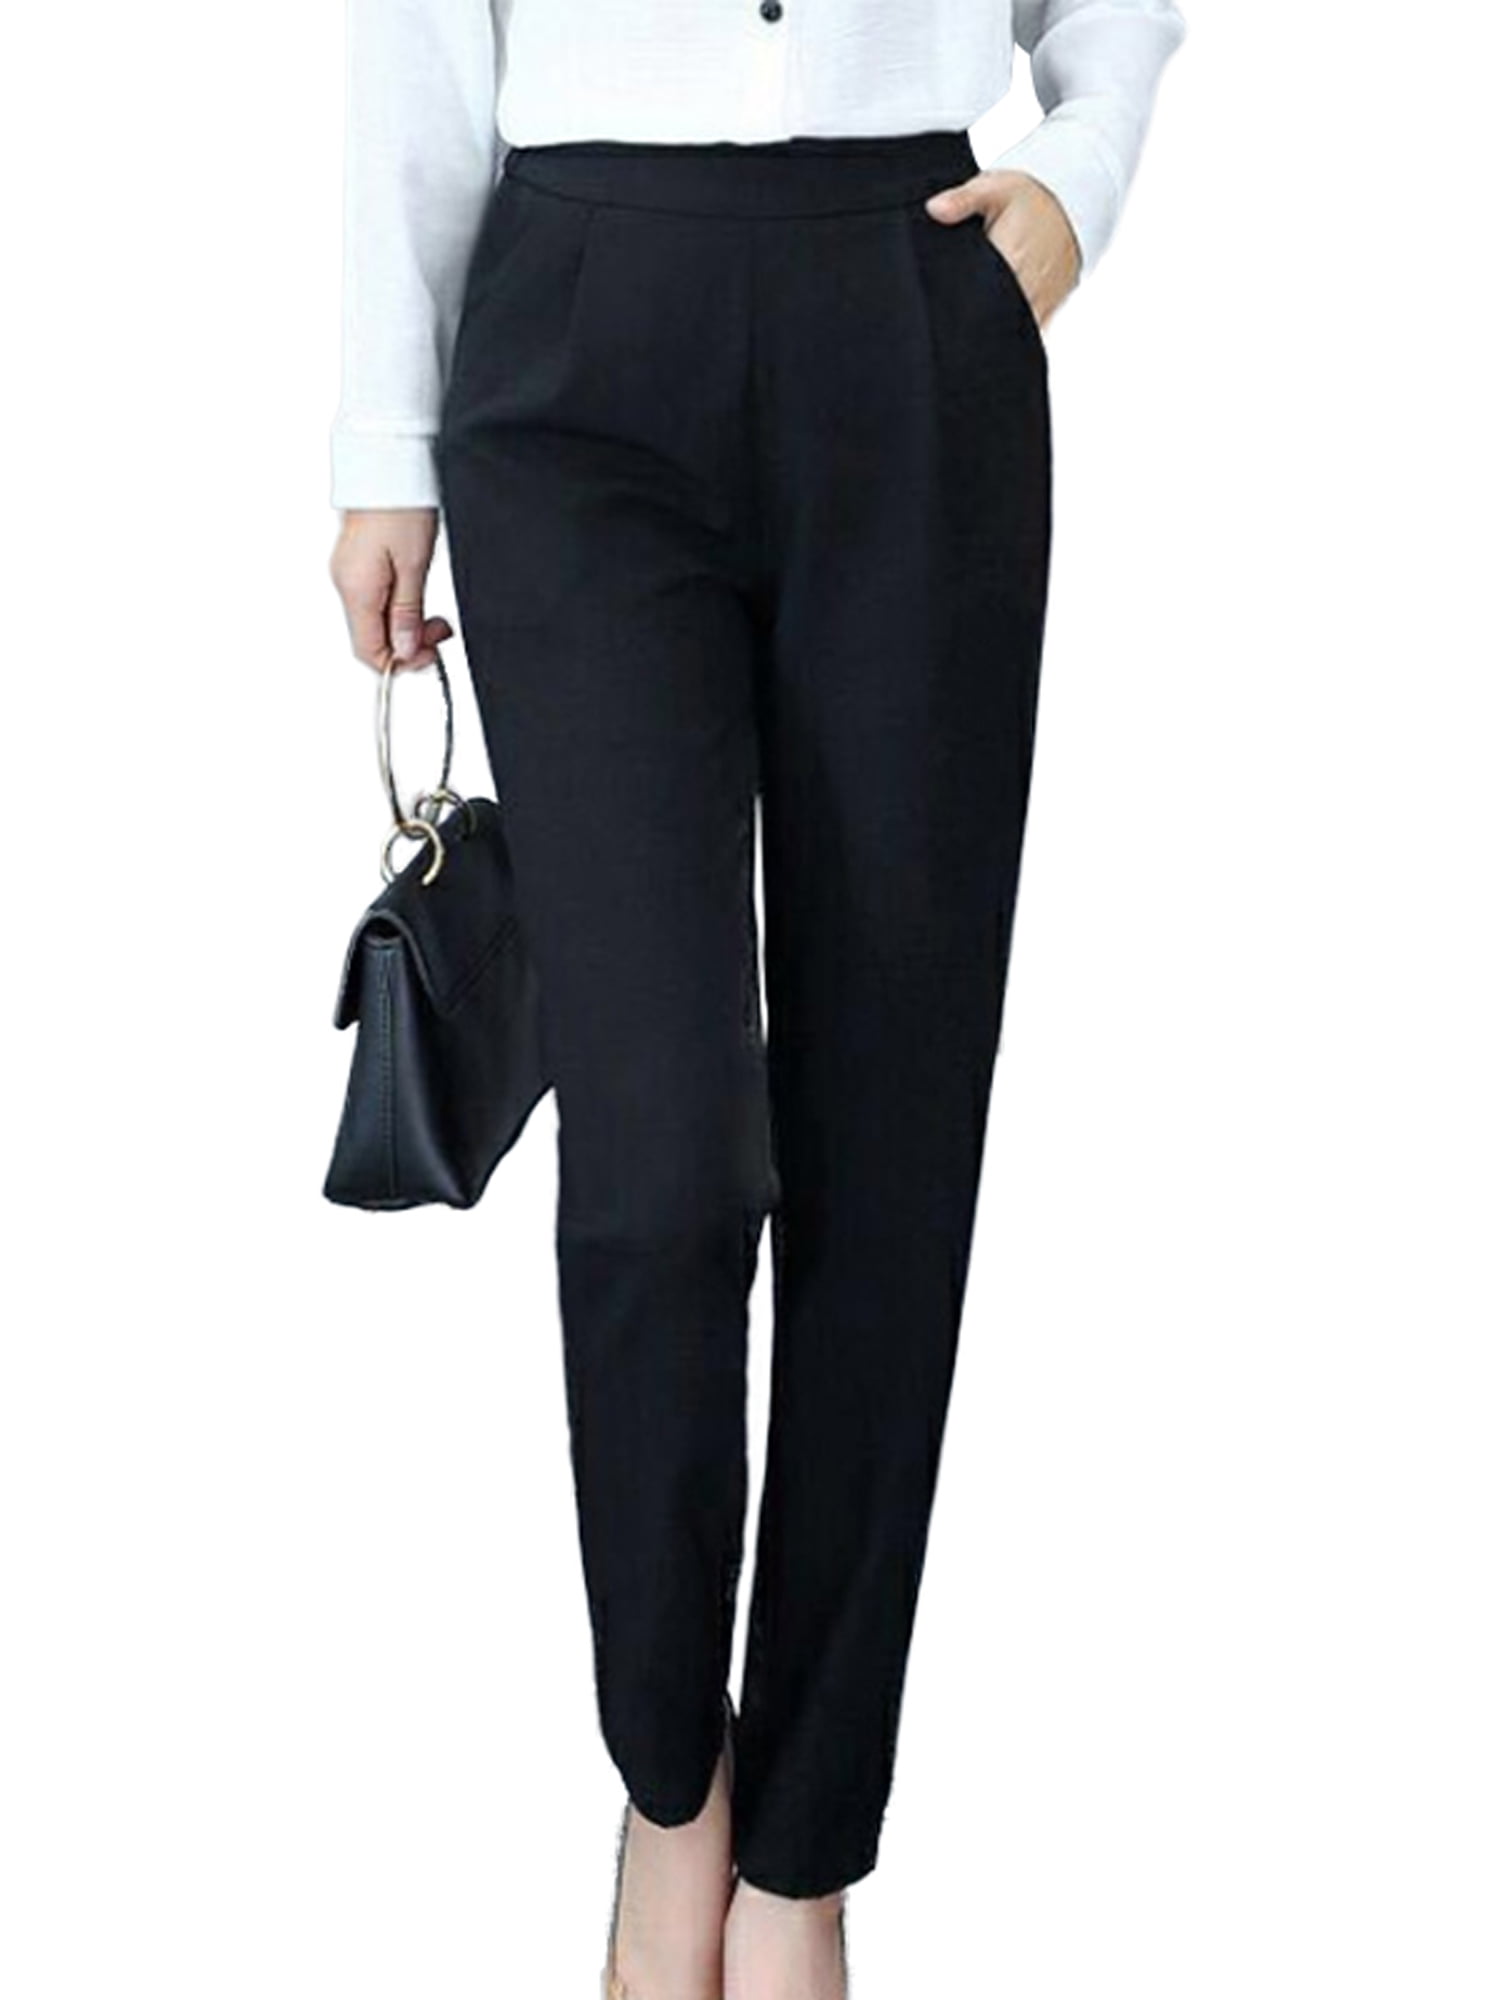 Inspire Me Ladies' Half Elasticated Waist Women's Trousers Machine Washable Casual Stretch Trousers with Pockets